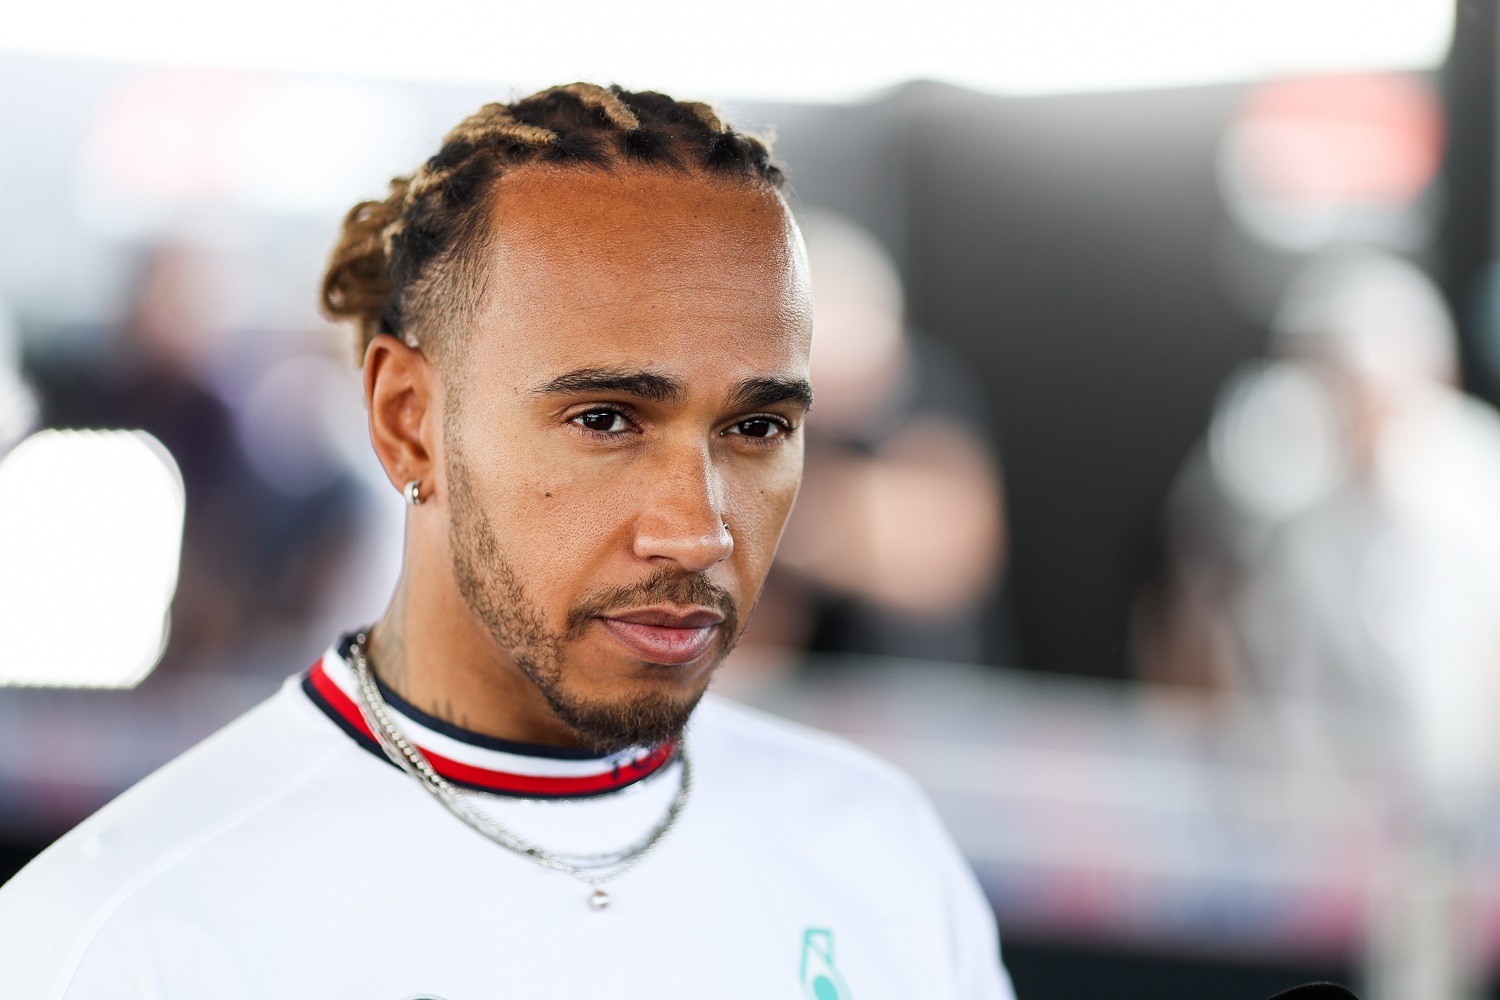 Lewis Hamilton Has Never Sounded as Discouraged as He Does at the Canadian Grand Prix